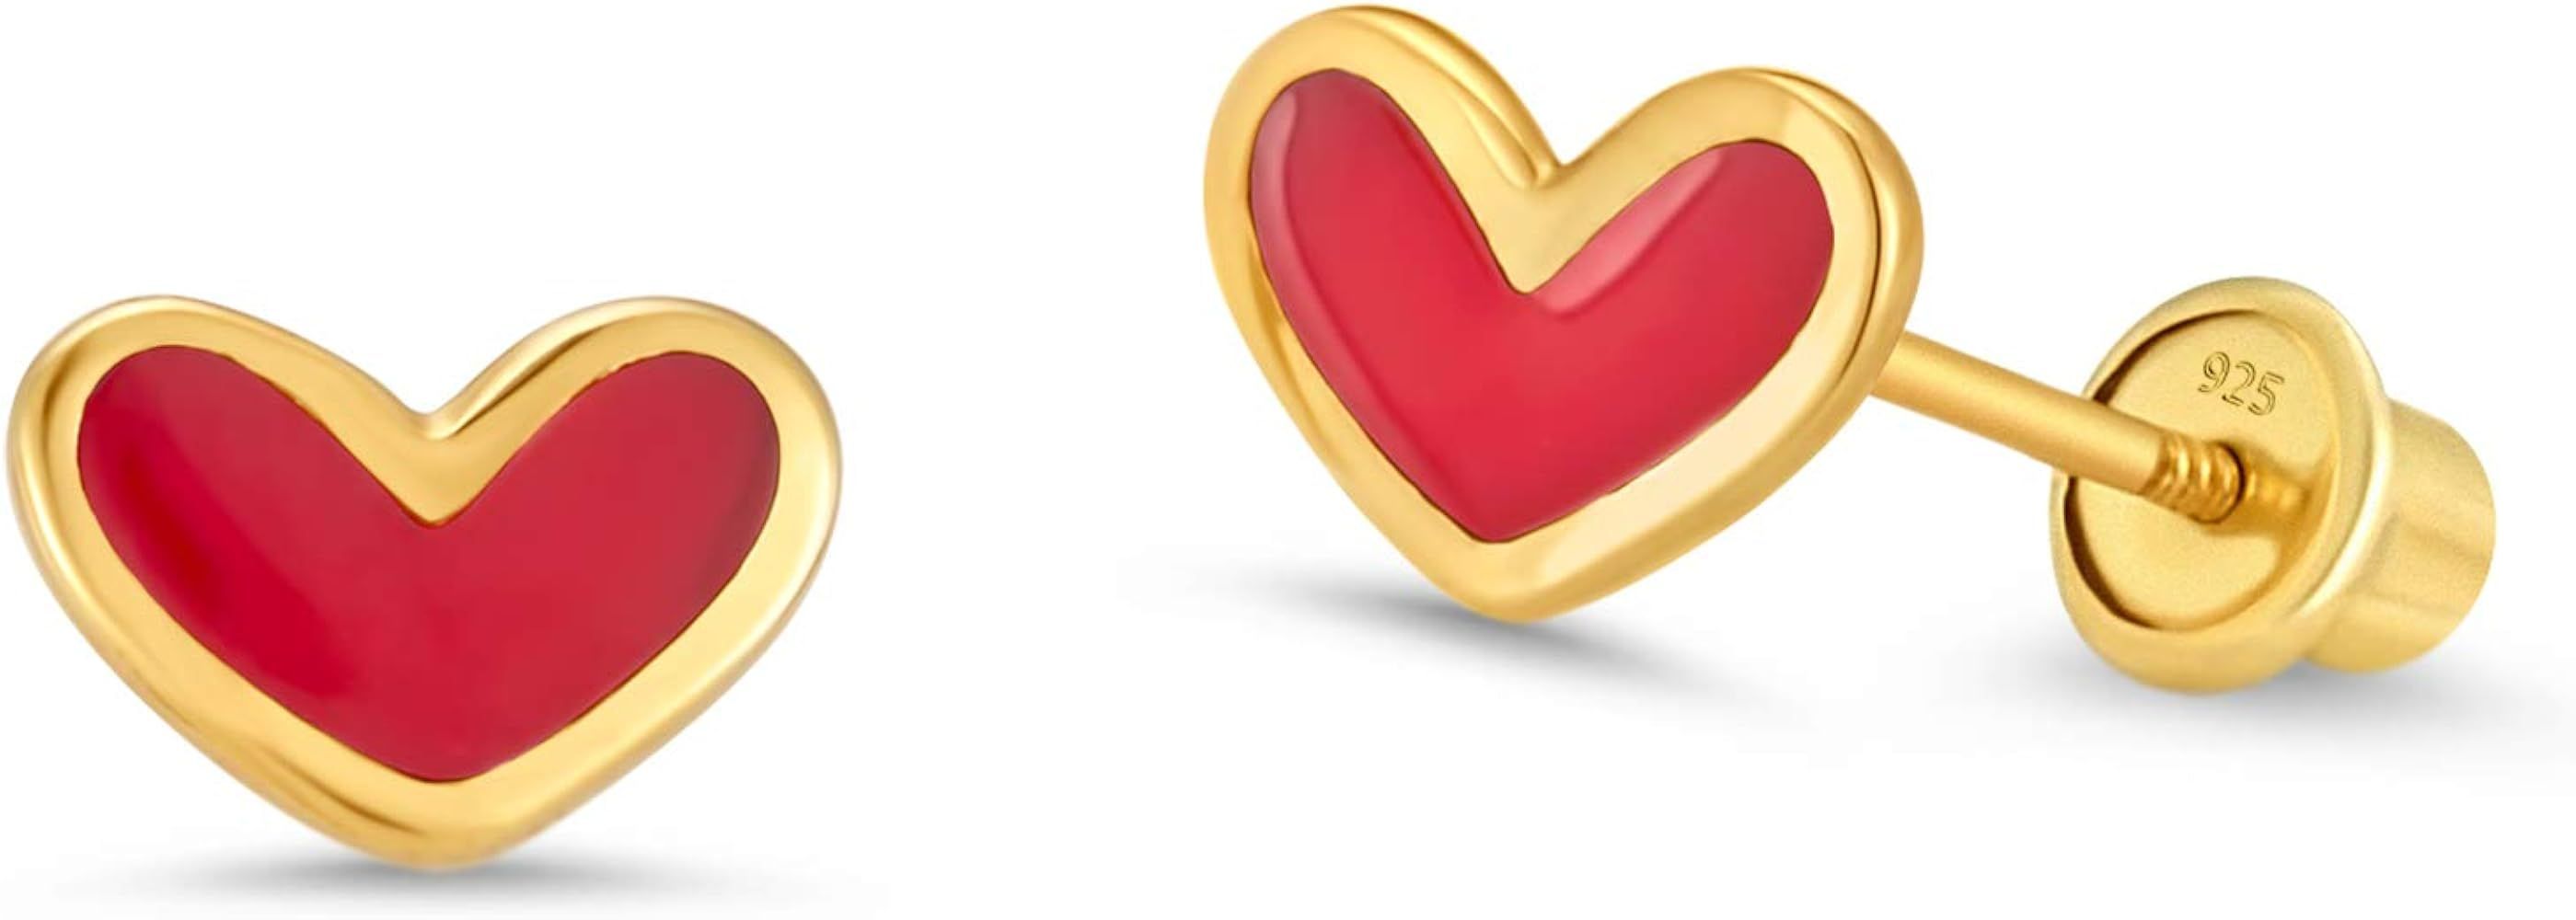 14k Gold Plated Enamel Red Heart Baby Girls Screwback Earrings with Sterling Silver Post | Amazon (US)